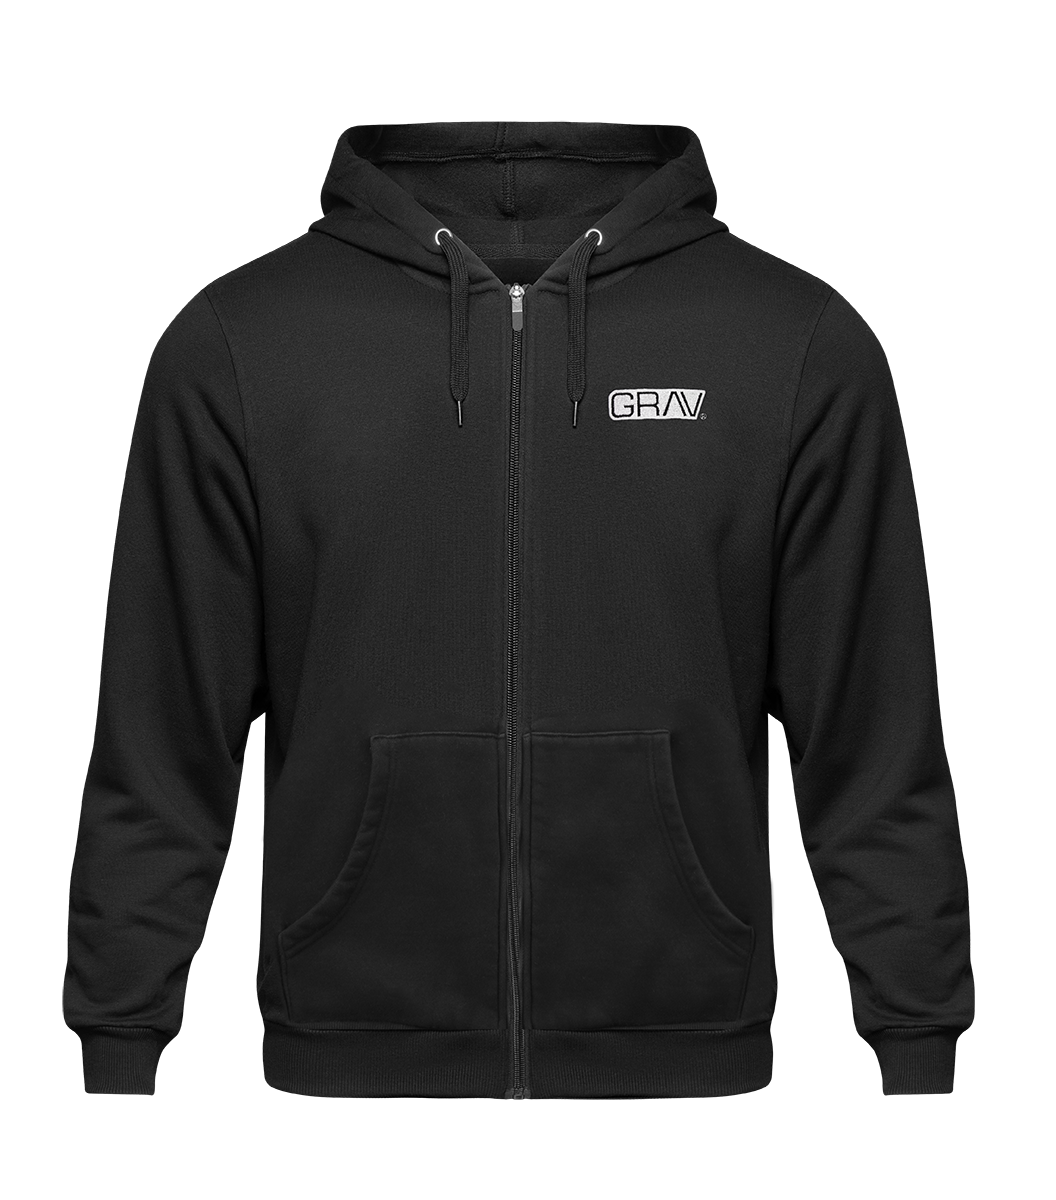 GRAV Hoodie in black with white logo, front view on seamless white background